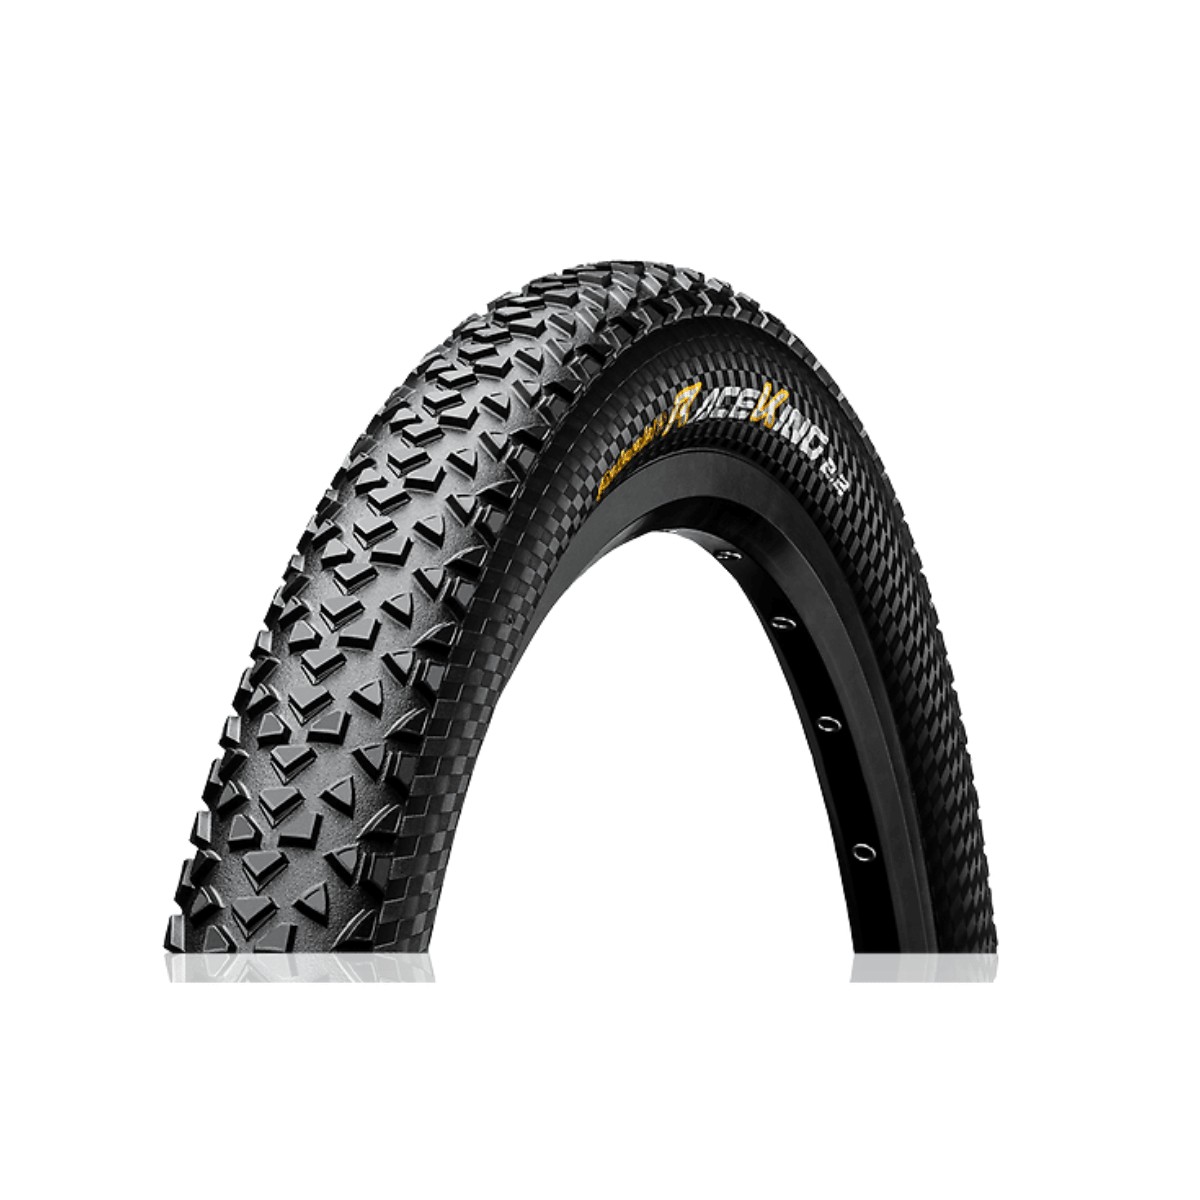 Continental Race King Protection 26, 27'5 or 29 x 2.20 Tubeless Ready Tire, Size 27.5x2.20